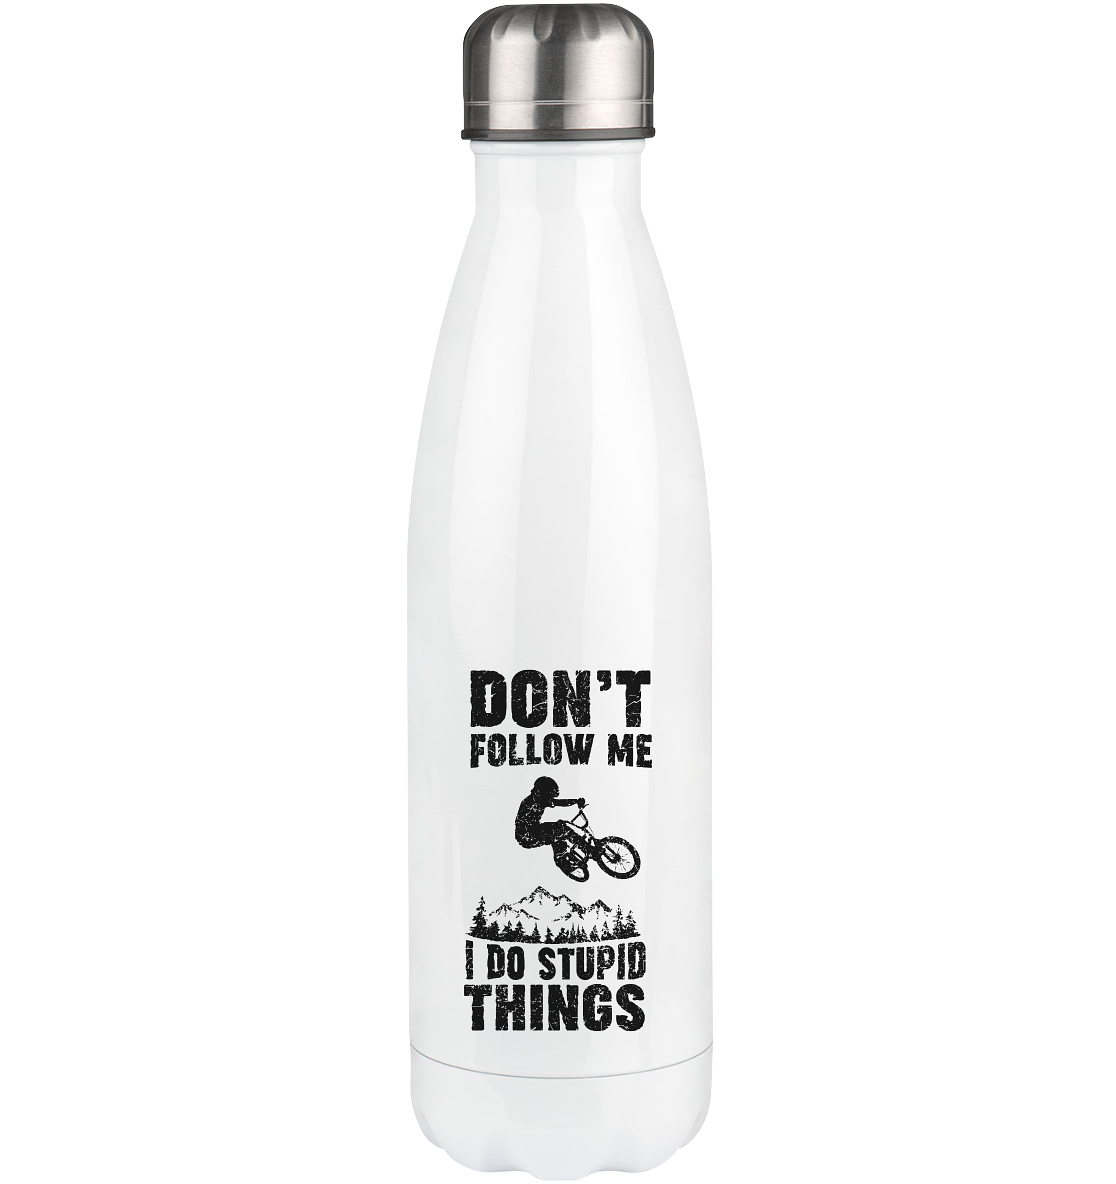 Don't follow me i do stupid things - Edelstahl Thermosflasche mountainbike 500ml